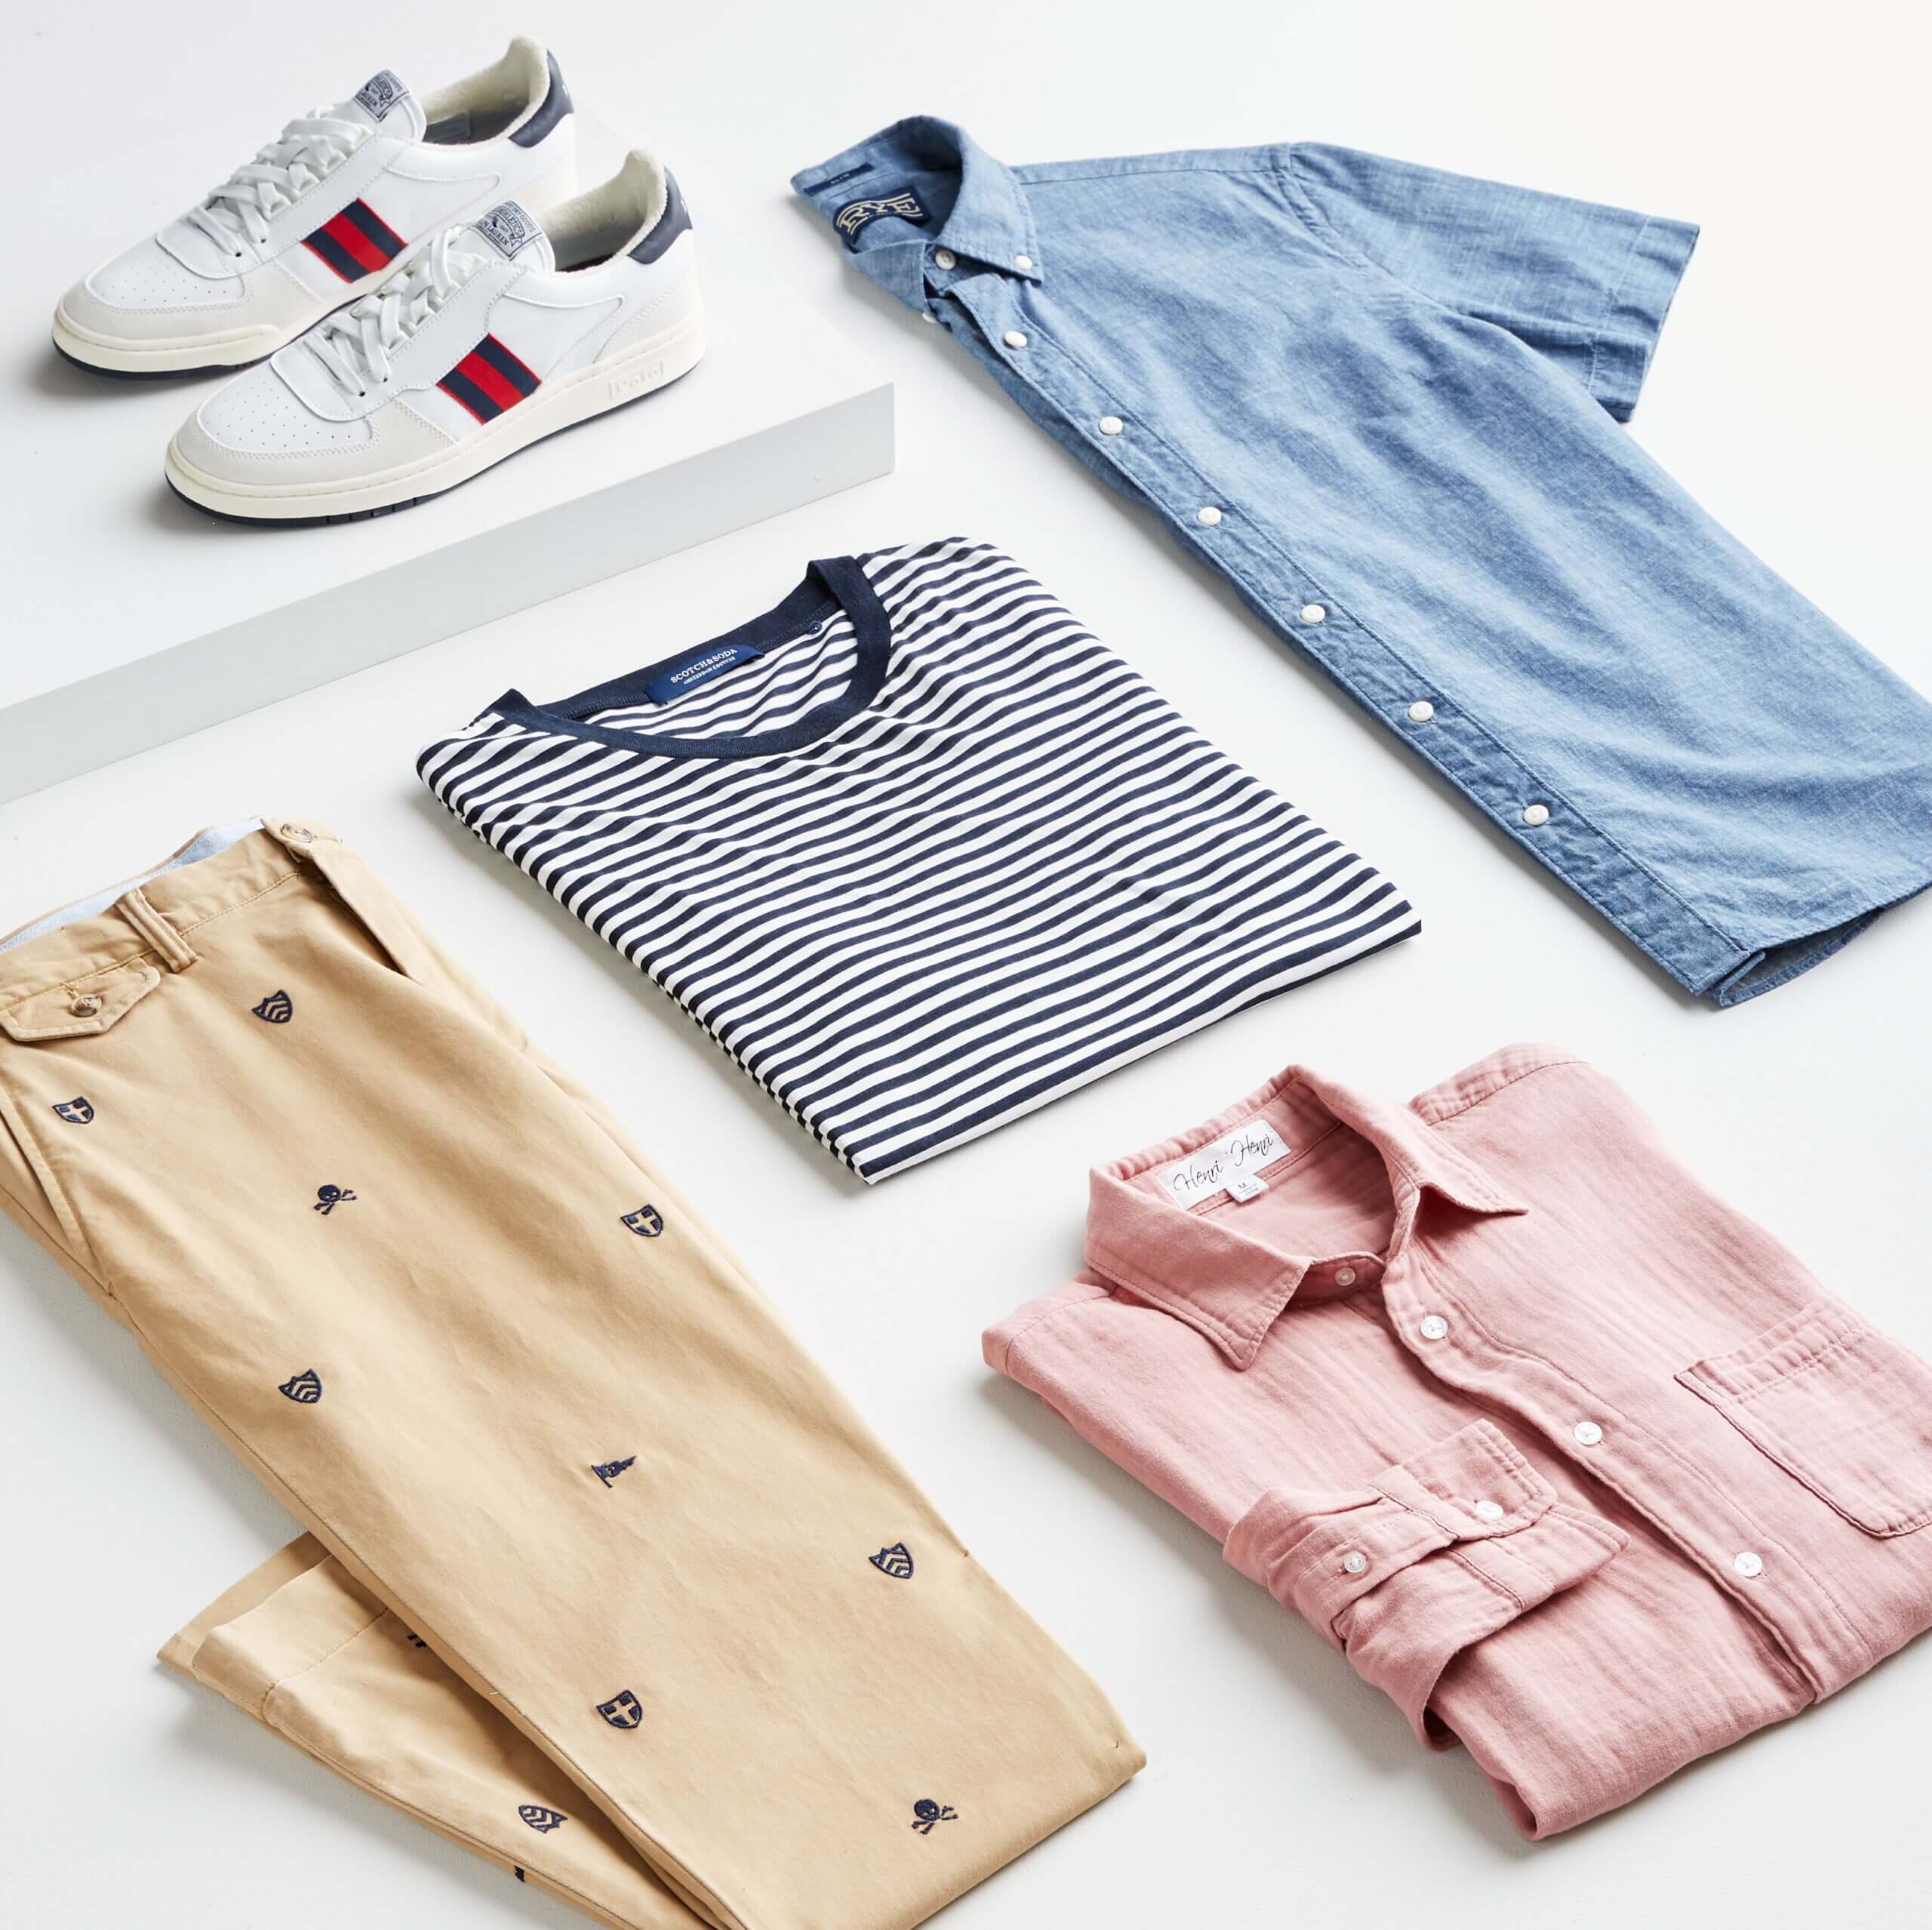 2022 Spring Style Guide for Men: What to Wear Now